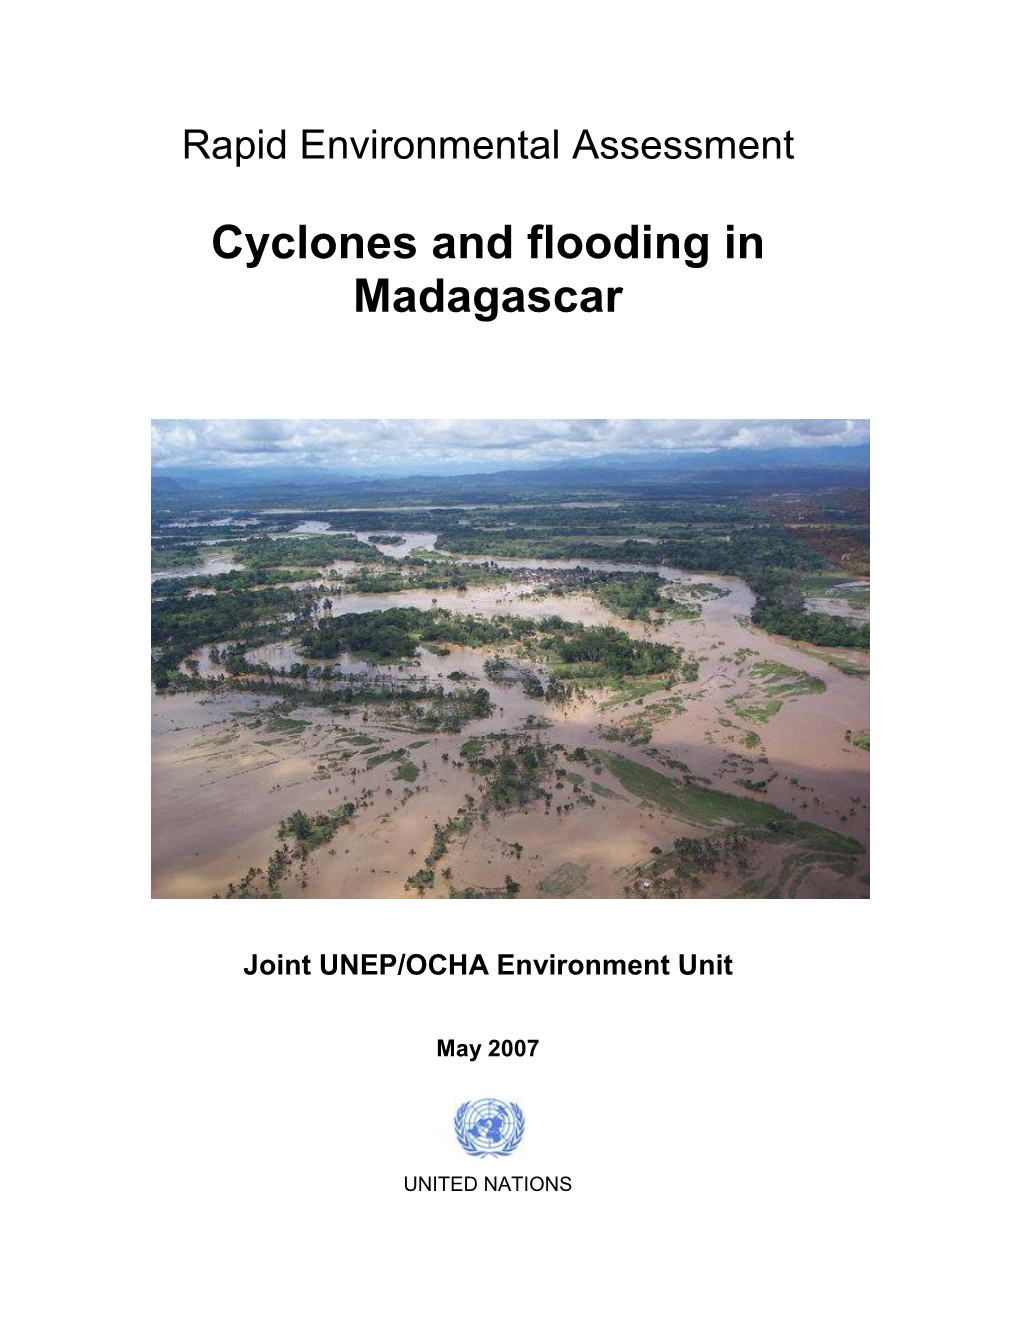 Cyclones and Flooding in Madagascar